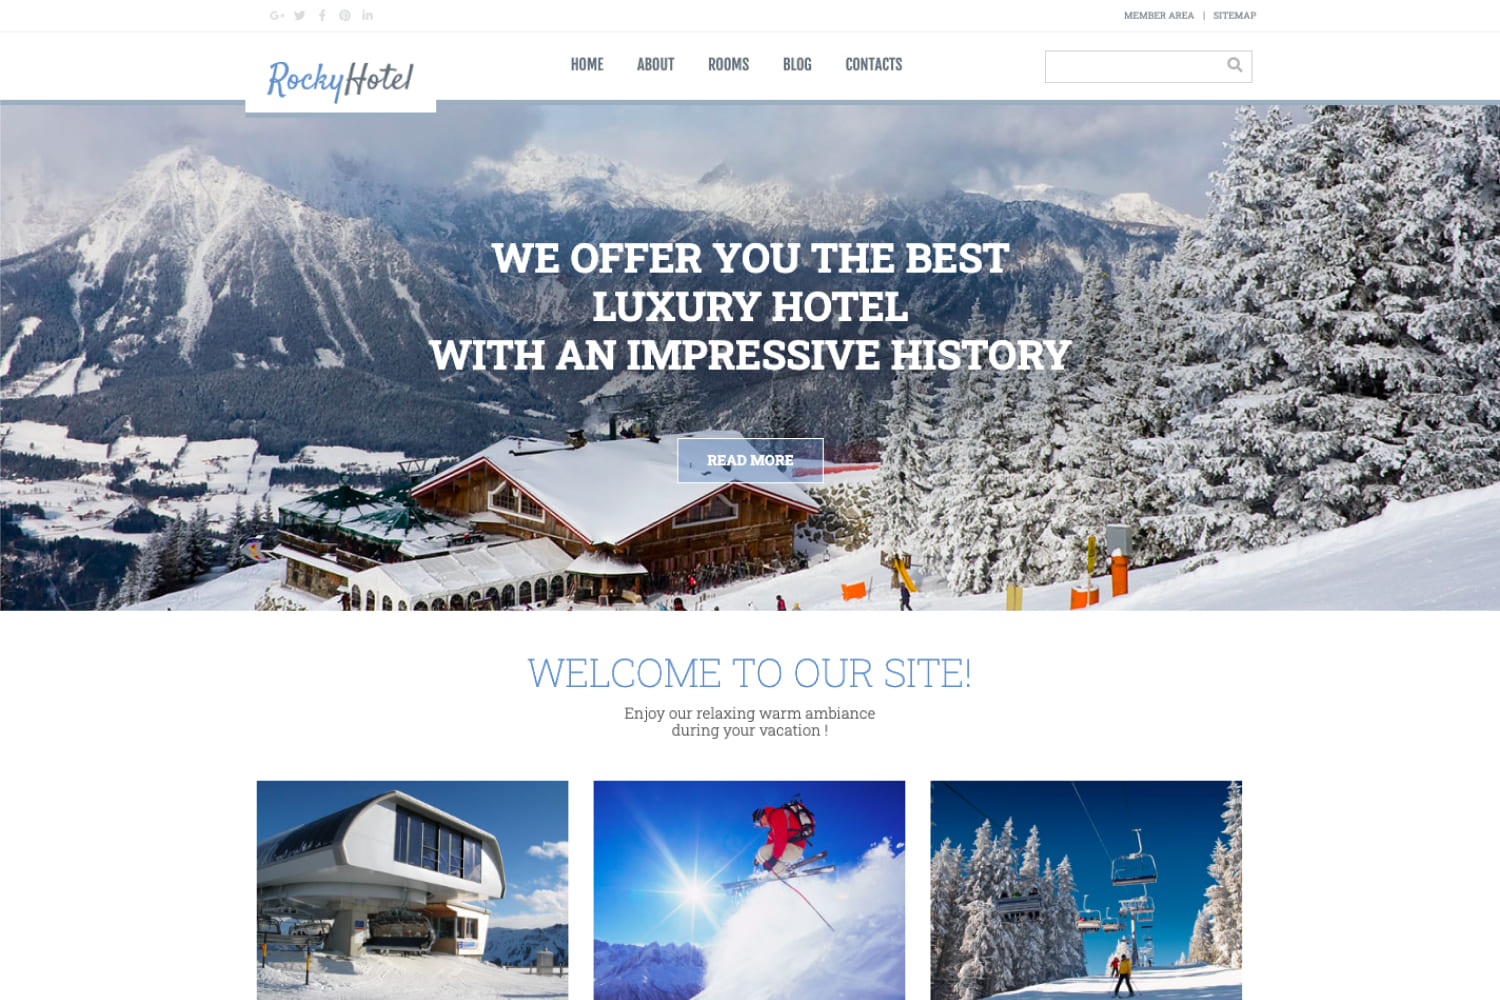 The main page of the hotel website with a photo of the ski resort and skiers.